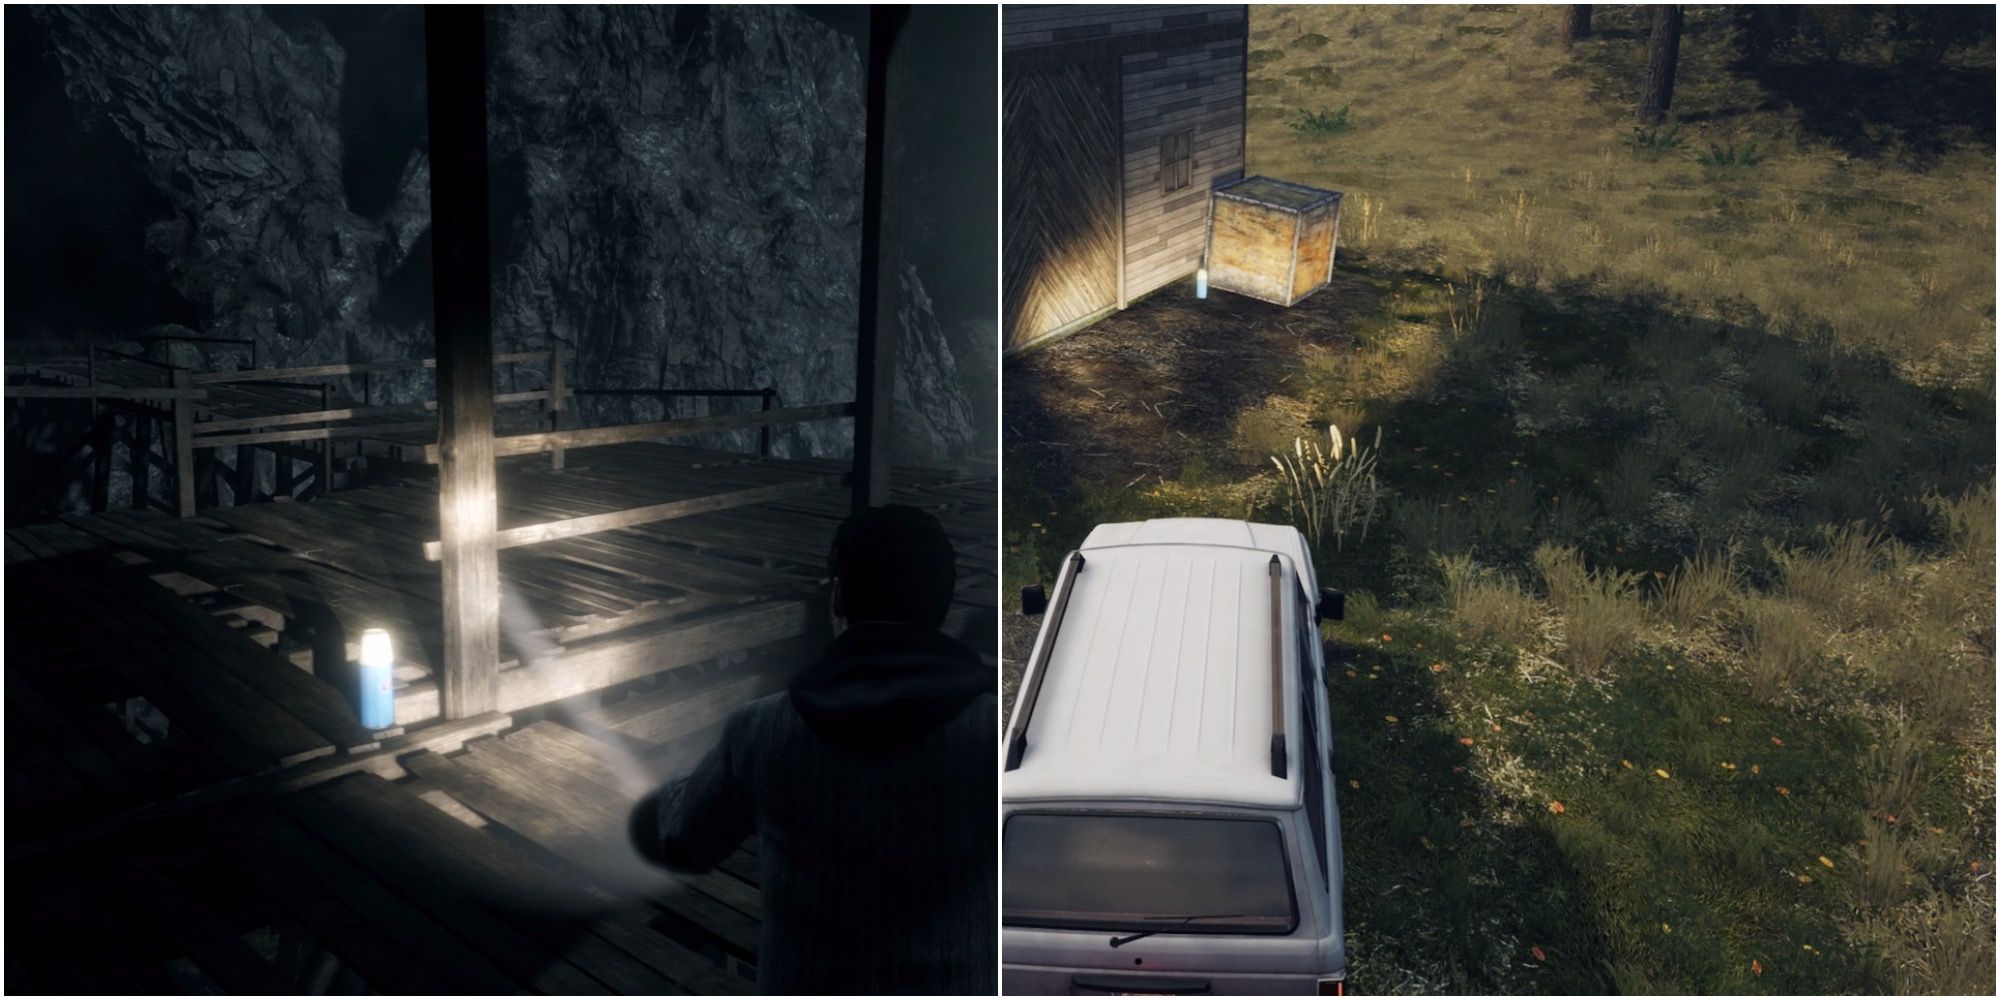 Where To Find All The Thermoses In Episode Six Of Alan Wake Remastered